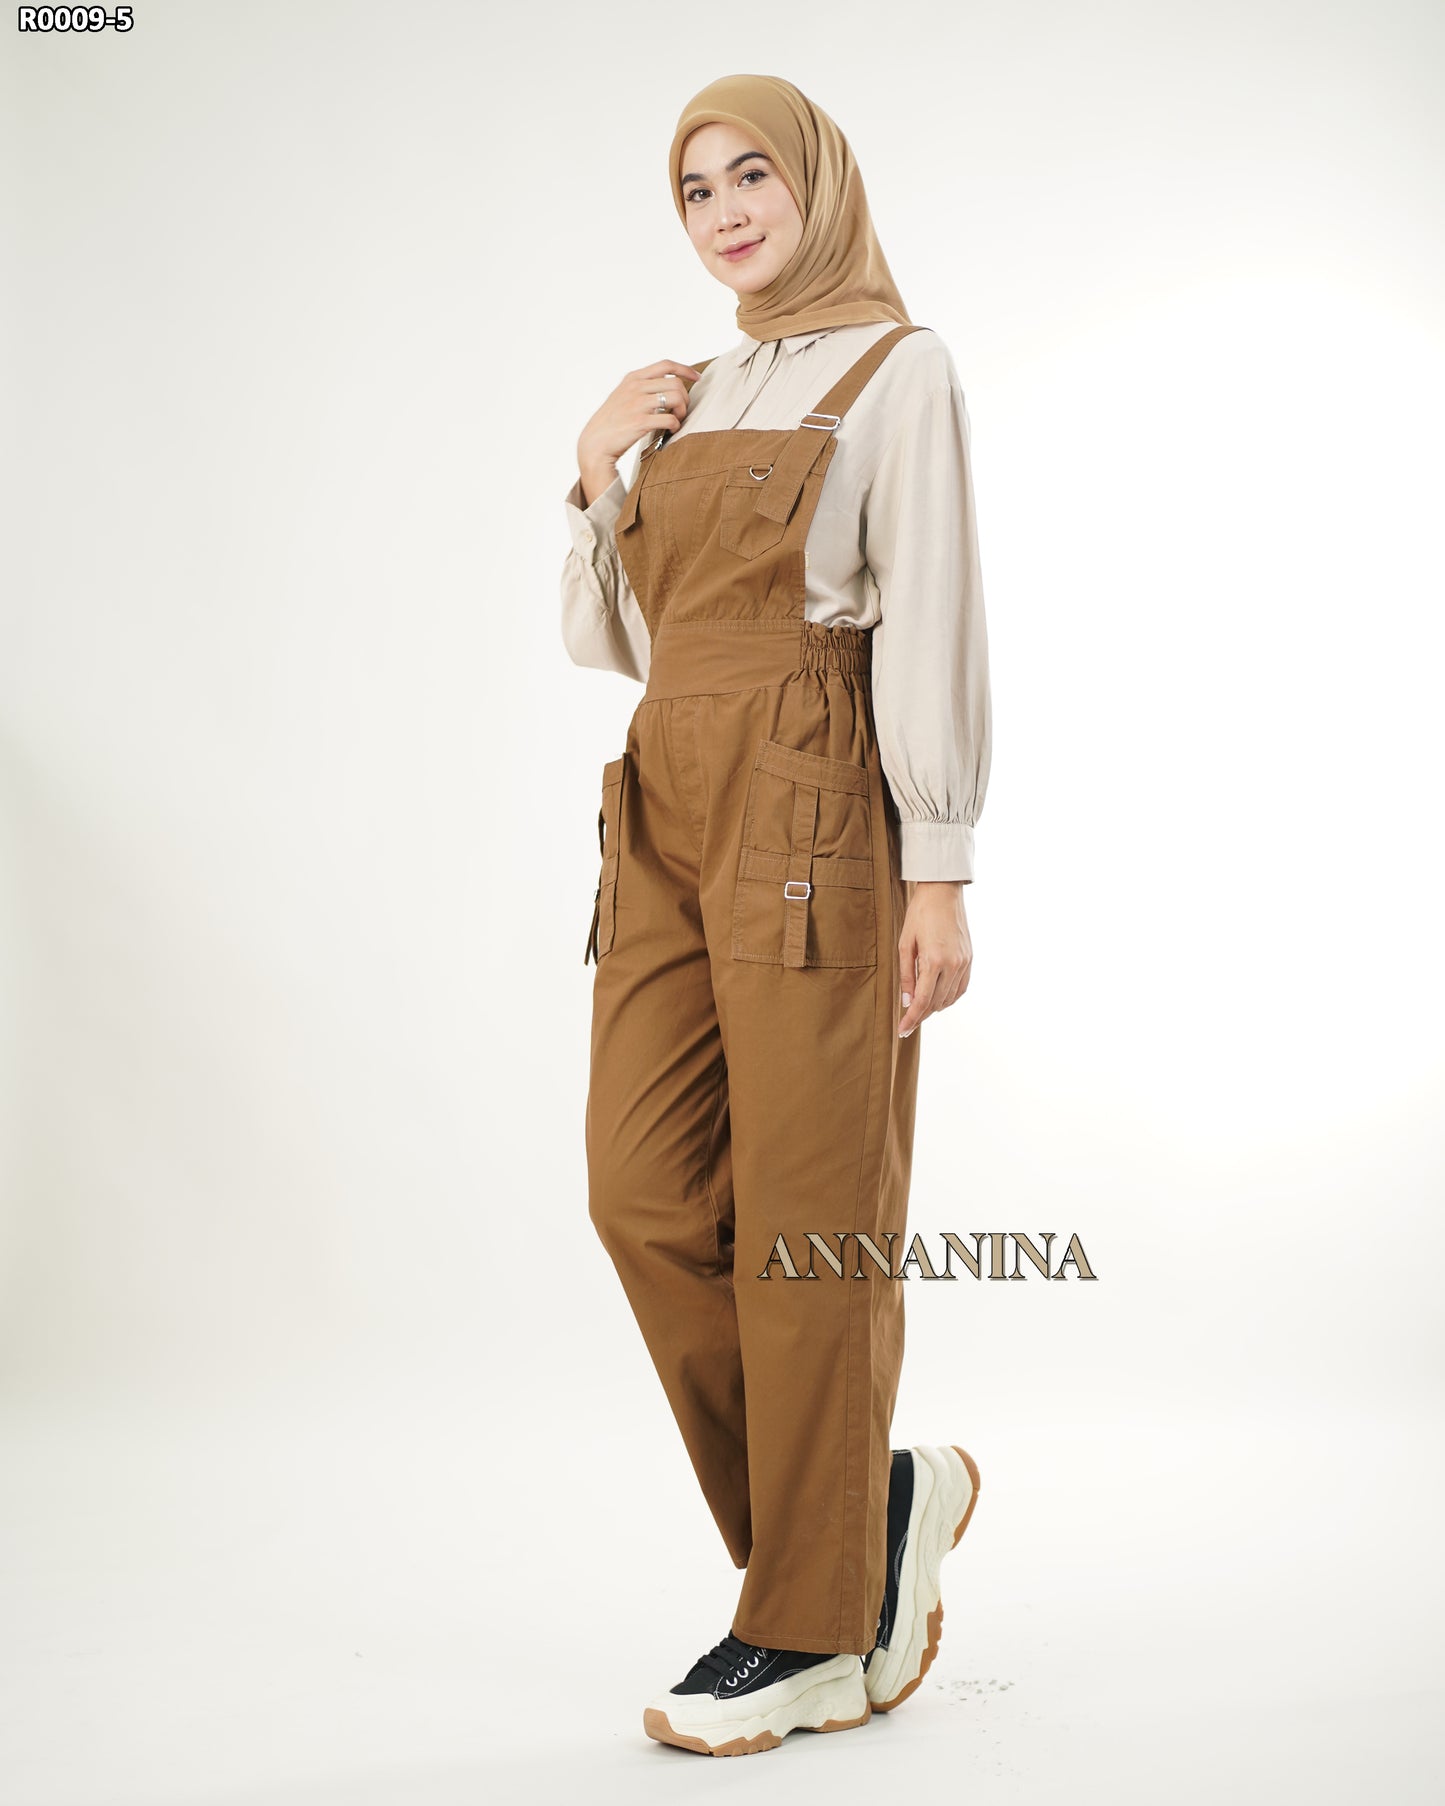 NMR Celana Jumpsuit Overall Baby Canvas Vol R0009-5